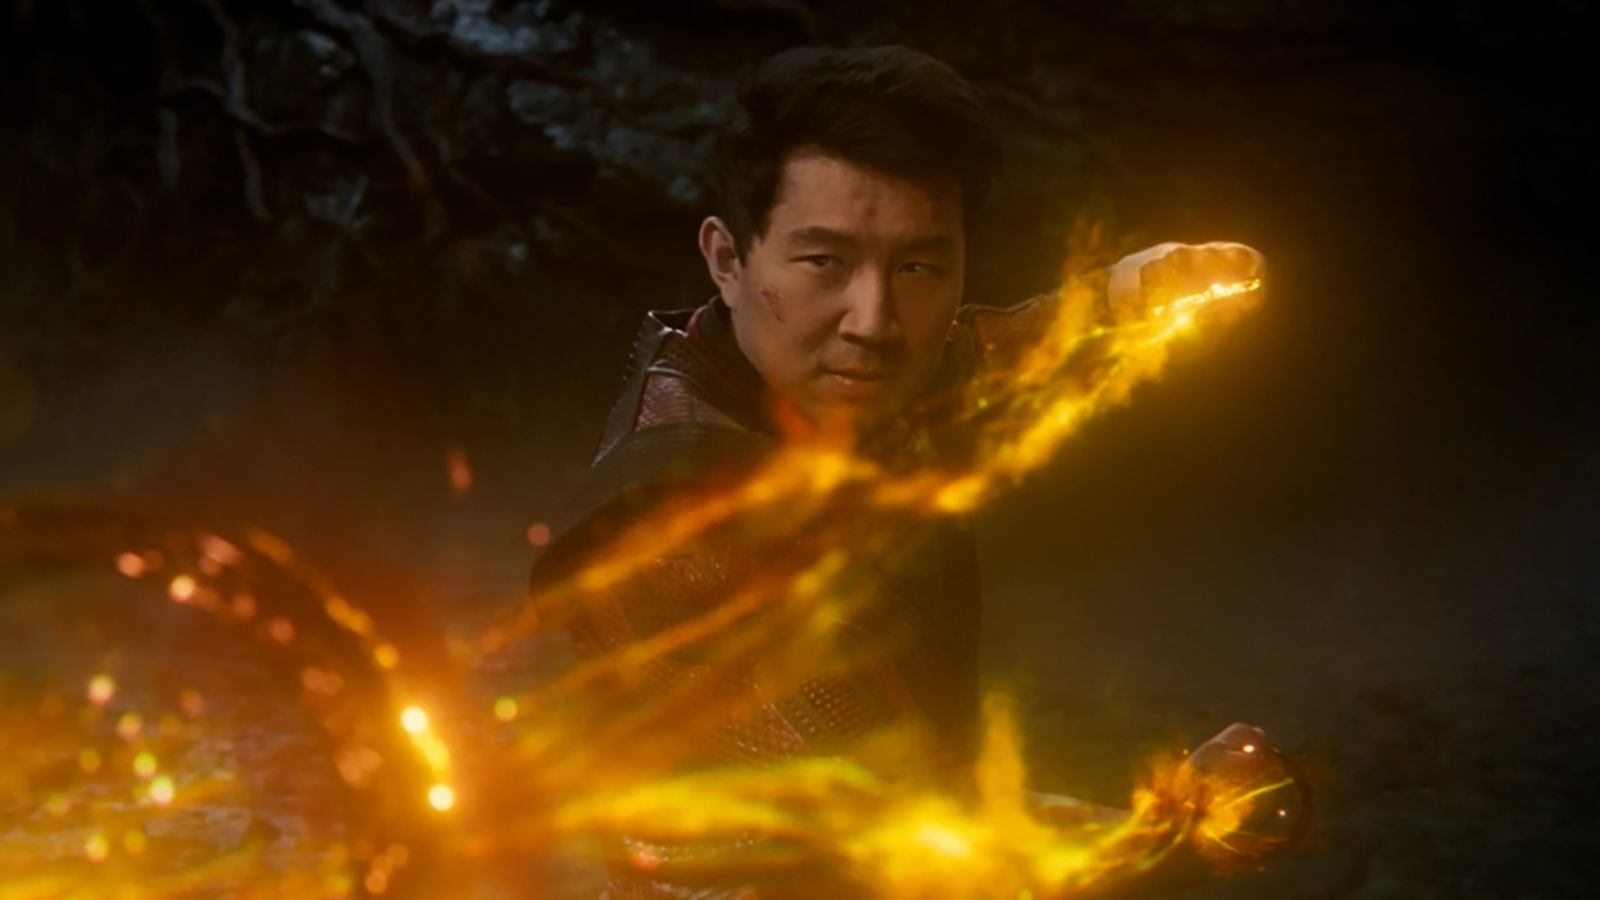 Shang Chi And The Legend Of The Ten Rings' Trailer: Watch New Look At Marvel's Film